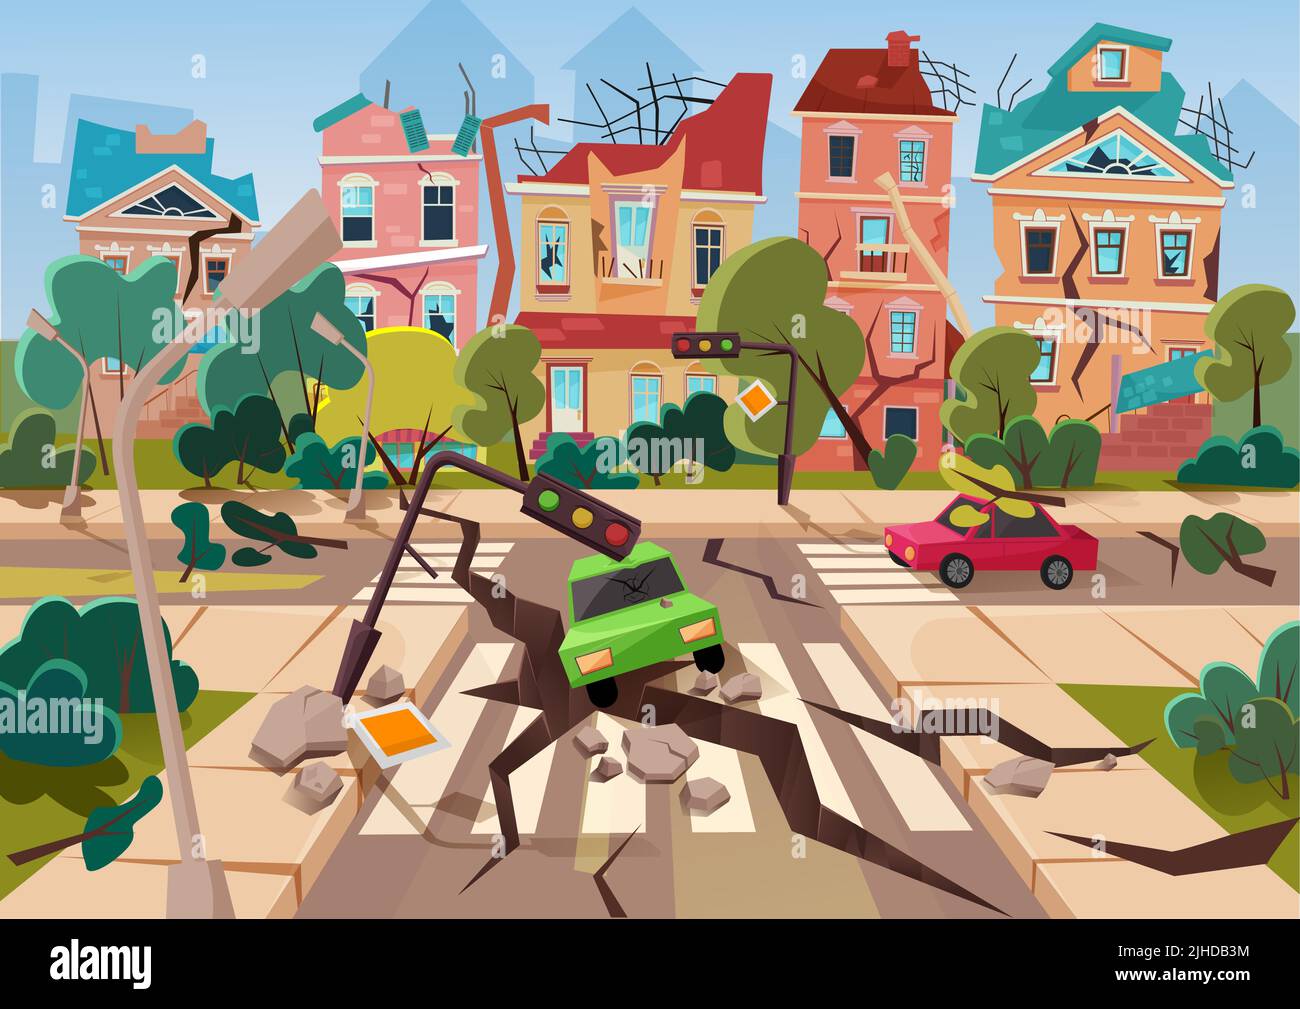 Earthquake accident in city vector illustration. Cartoon natural disaster destroying buildings, roads and cars, apocalyptic cityscape with abandoned ruins of broken houses and constructions background Stock Vector